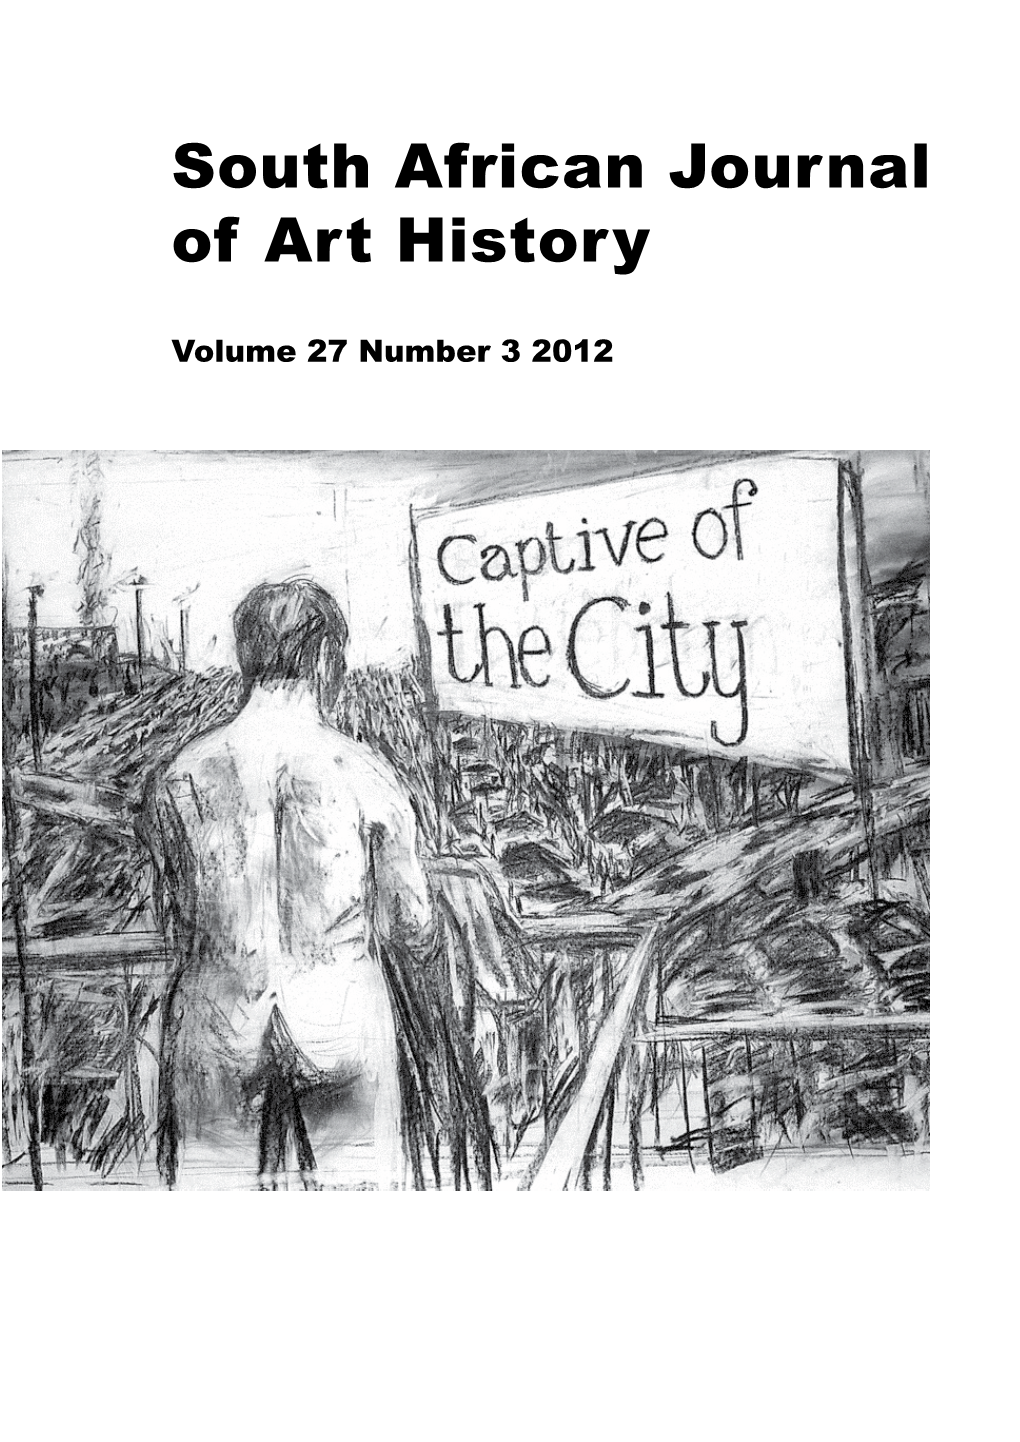 South African Journal of Art History Volume 27 Number 3 2012 History Art of South African Journal South African Journal of Art History